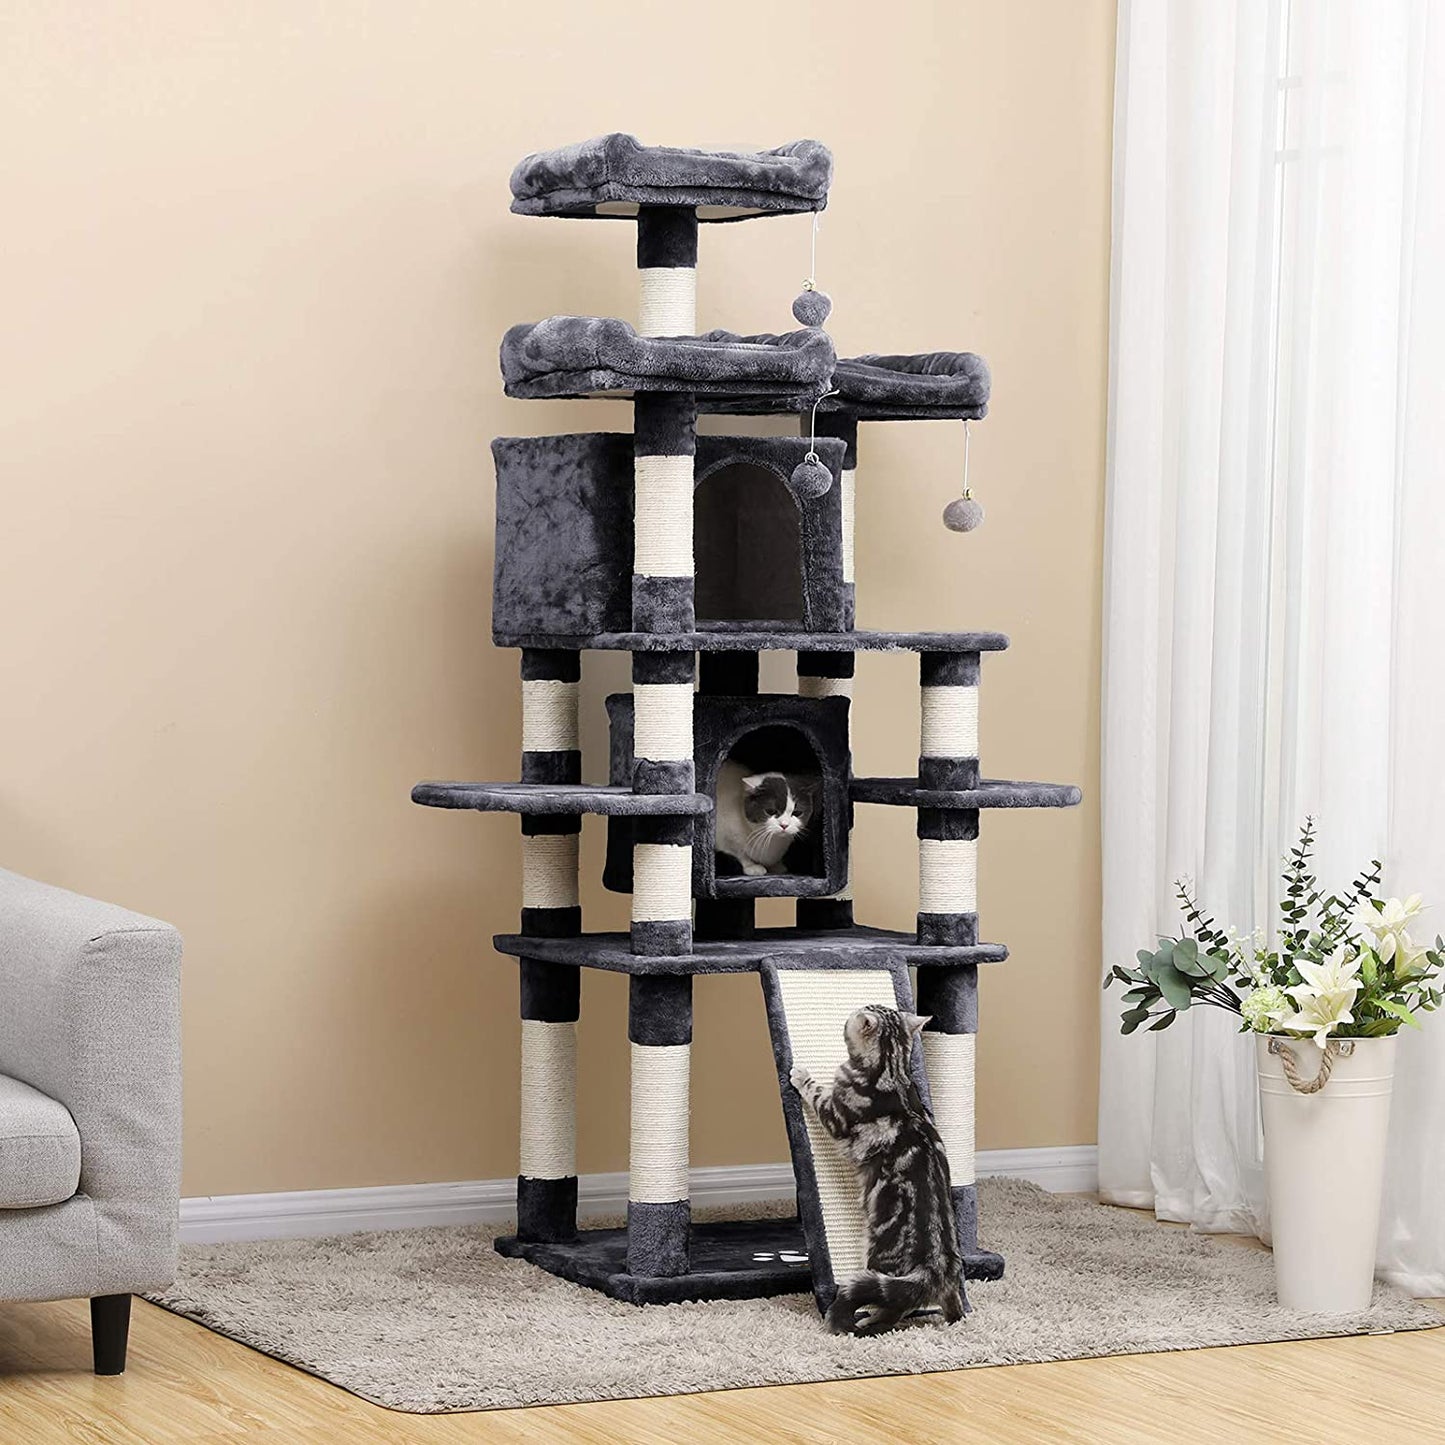 Nancy's Clacton Luxury Scratching Post for Cats - Cat Scratching Post - 5 Lying Places - Gray and White - 60 x 55 x 172 cm